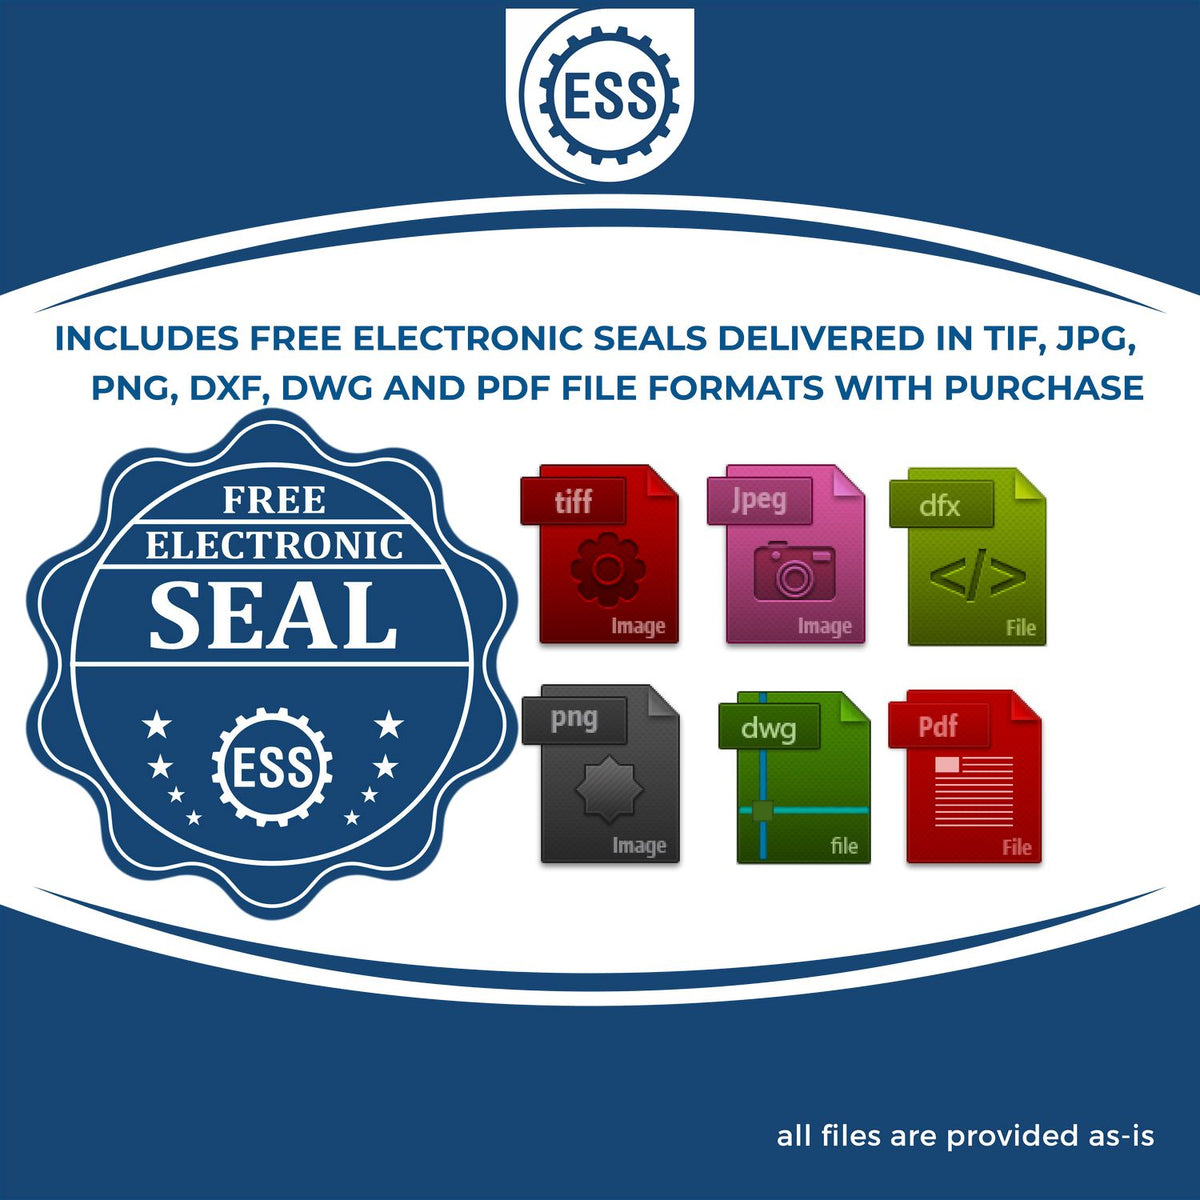 An infographic for the free electronic seal for the Soft Pennsylvania Professional Engineer Seal illustrating the different file type icons such as DXF, DWG, TIF, JPG and PNG.